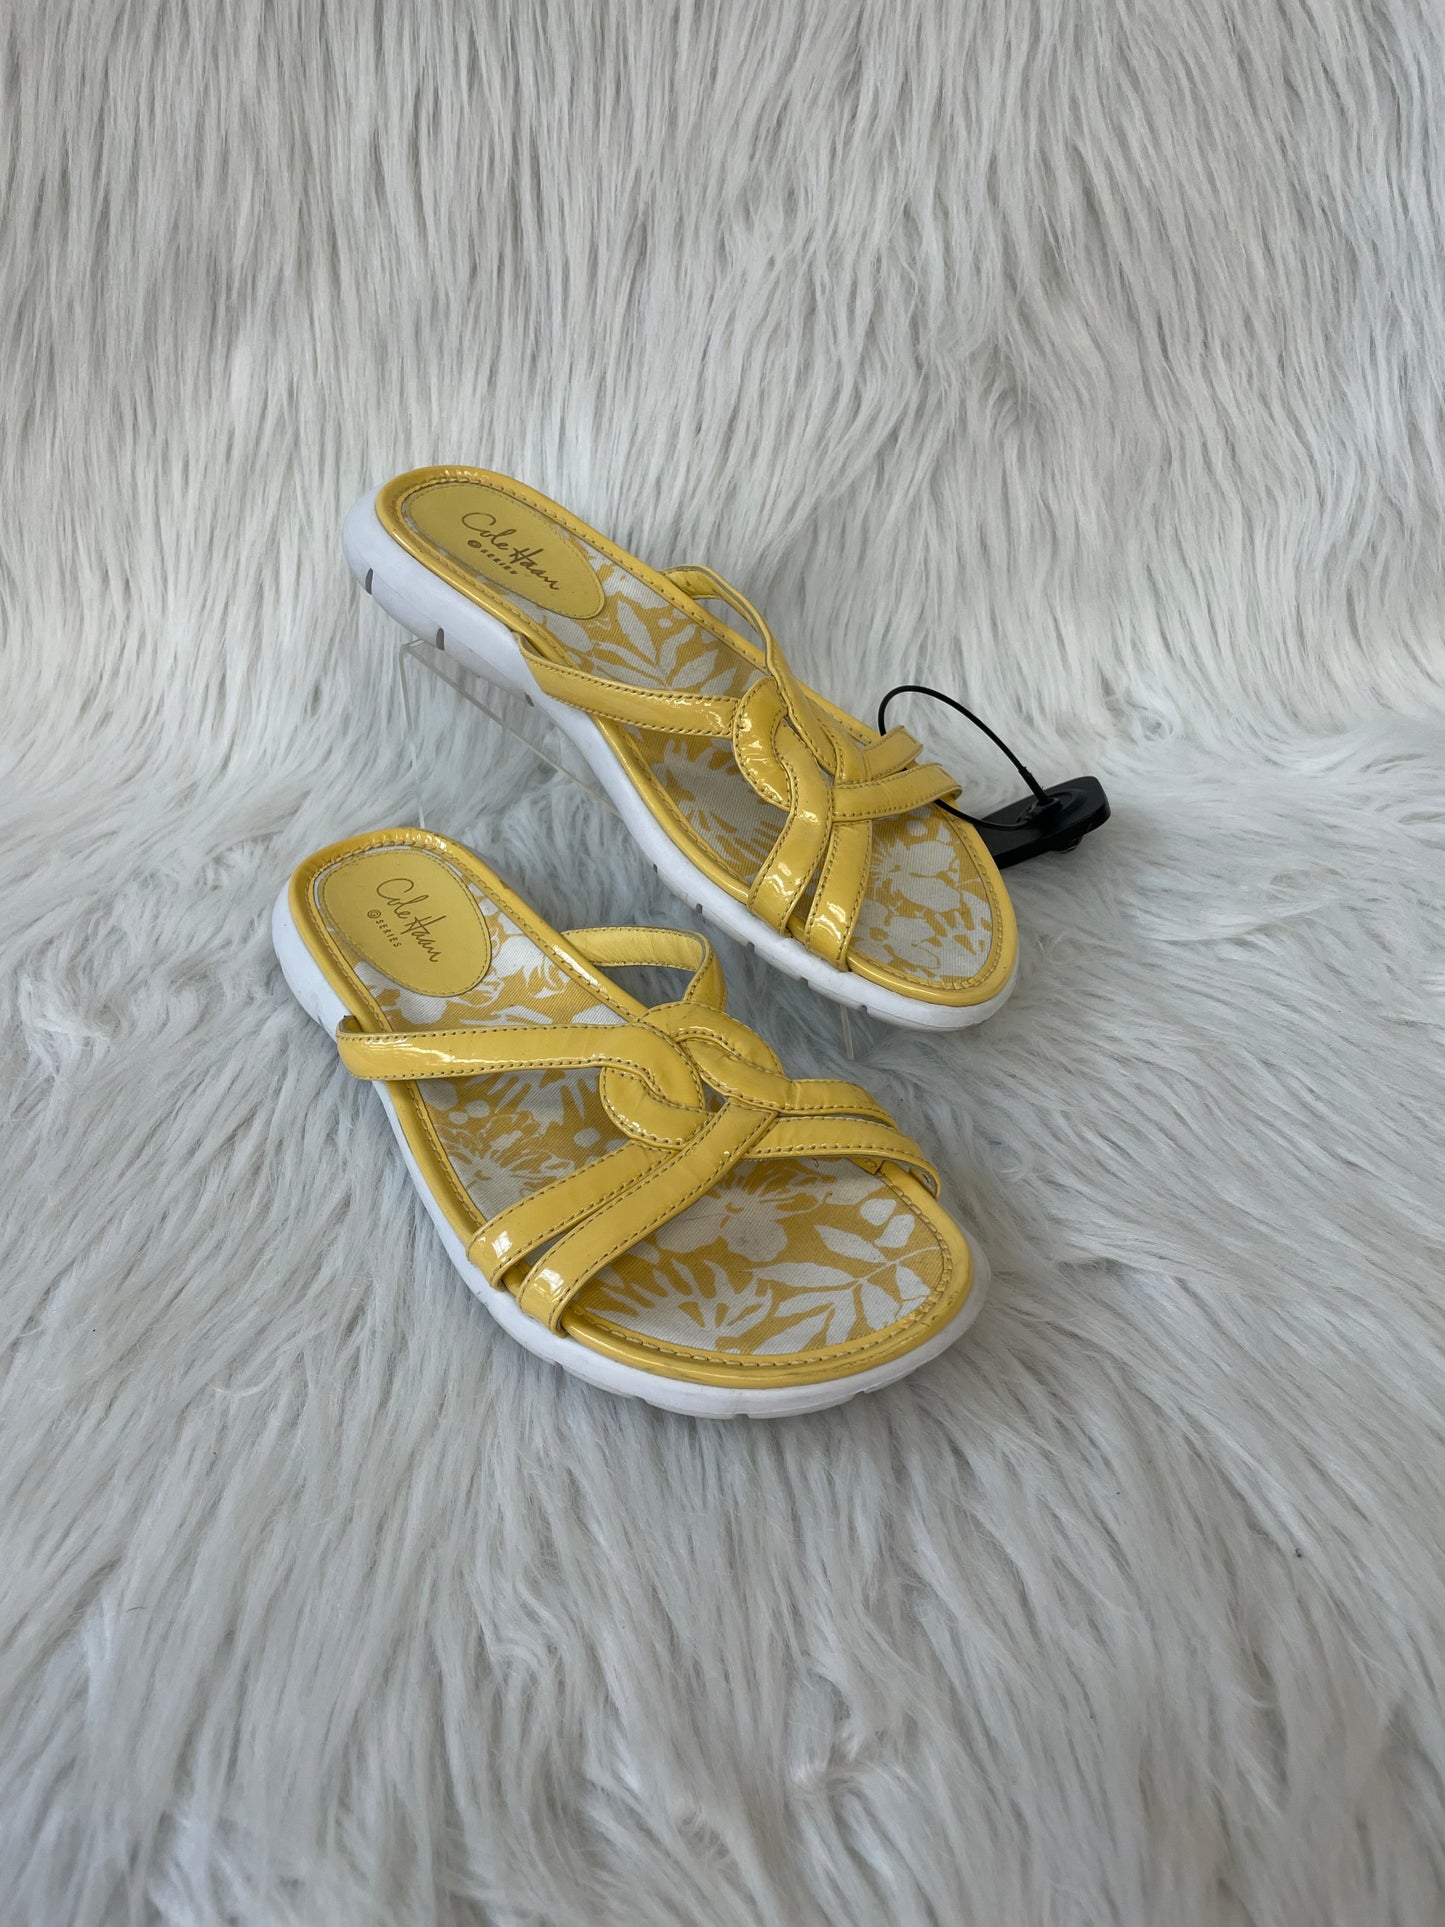 Sandals Flats By Cole-haan  Size: 6.5